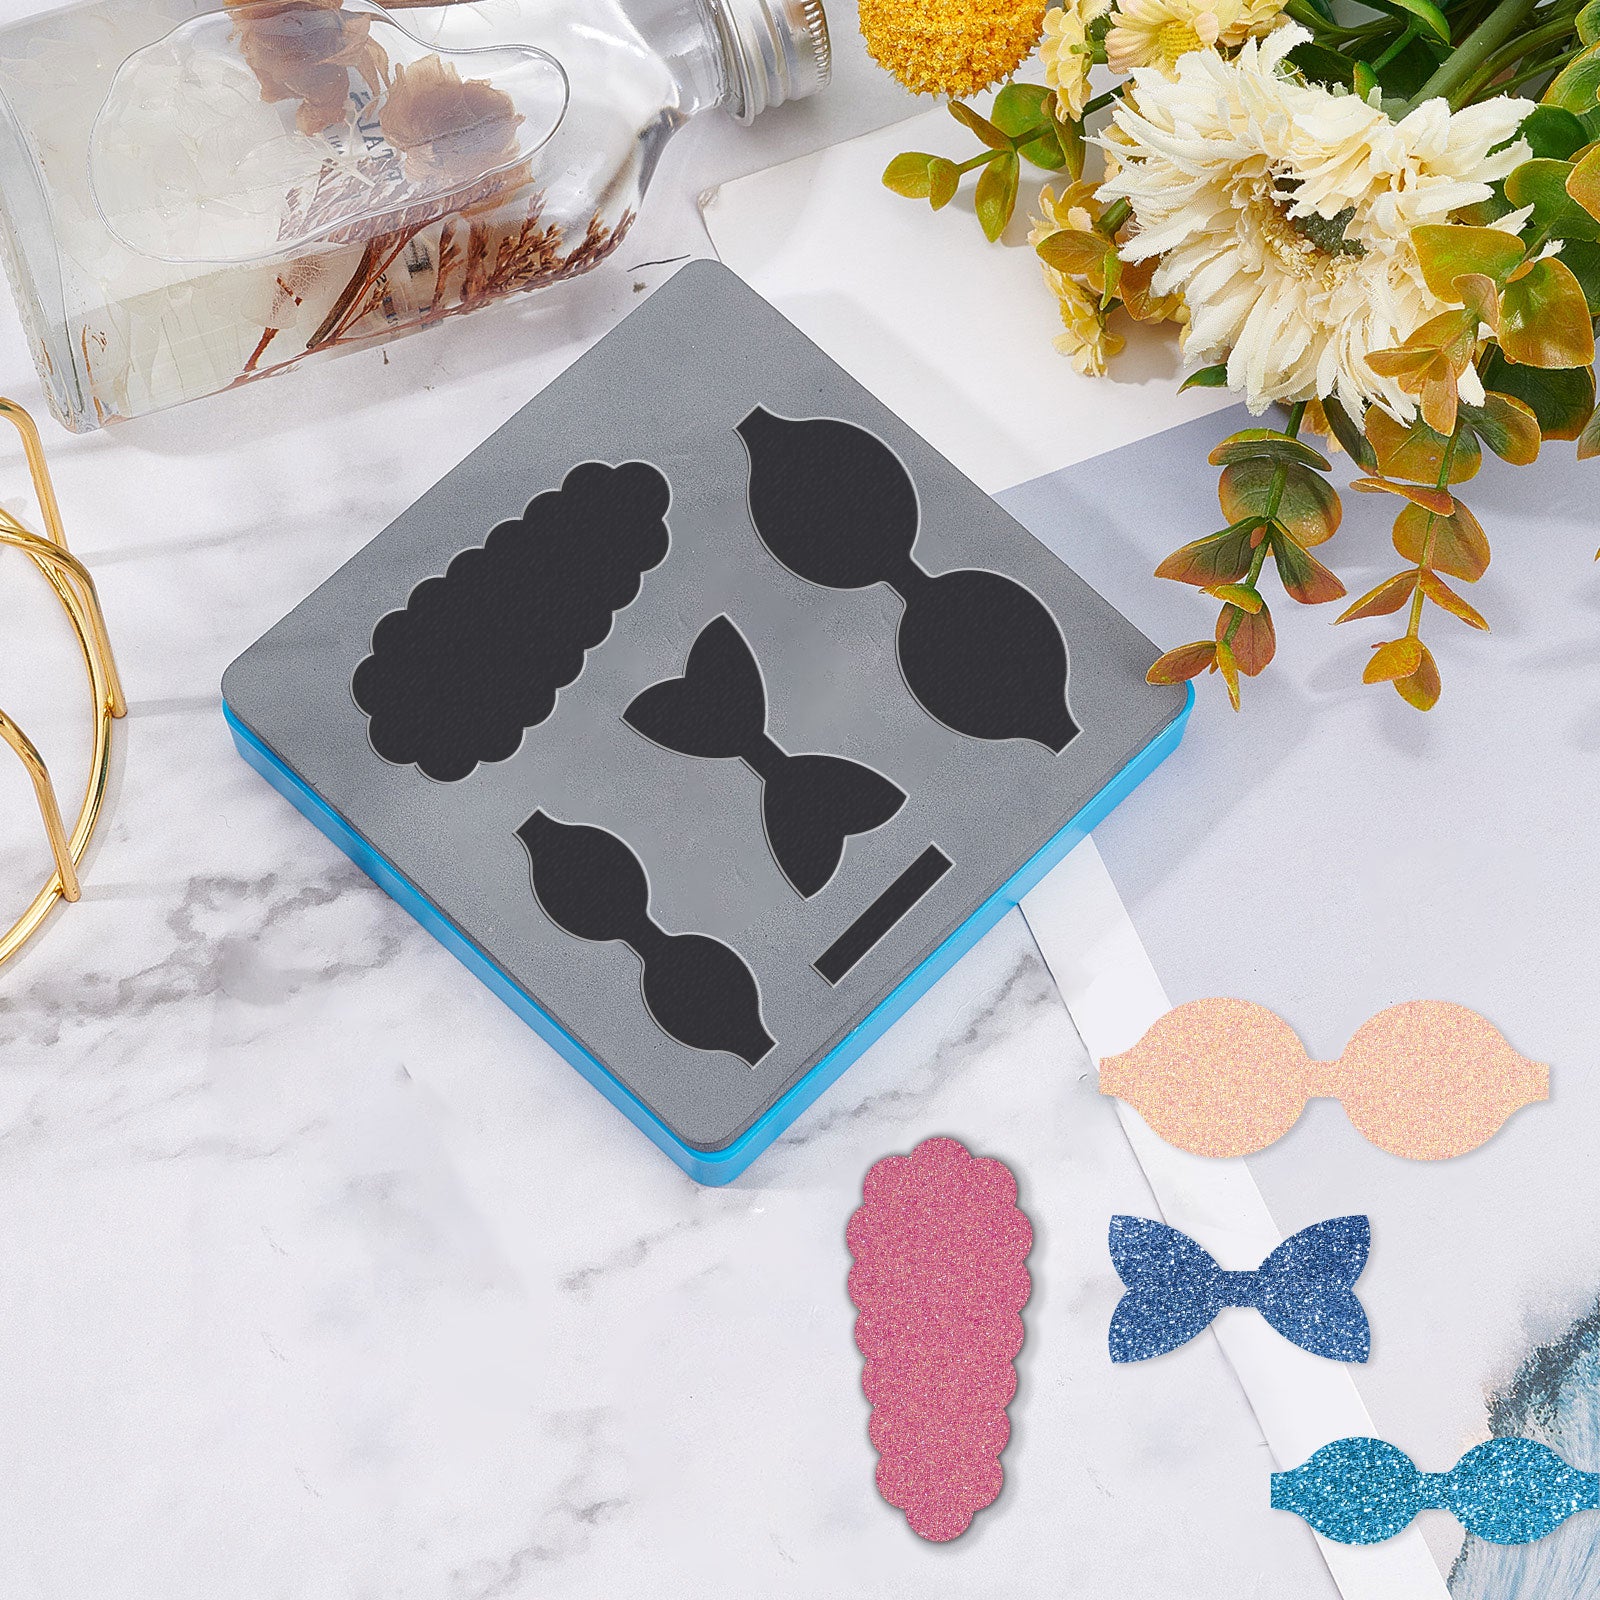 Globleland Die Cutting Leather Bow Hairpin Earring Cutting Dies Stencil Embossing Craft Decor Leather Mold Template Protective Rubber Box for DIY Paper Card